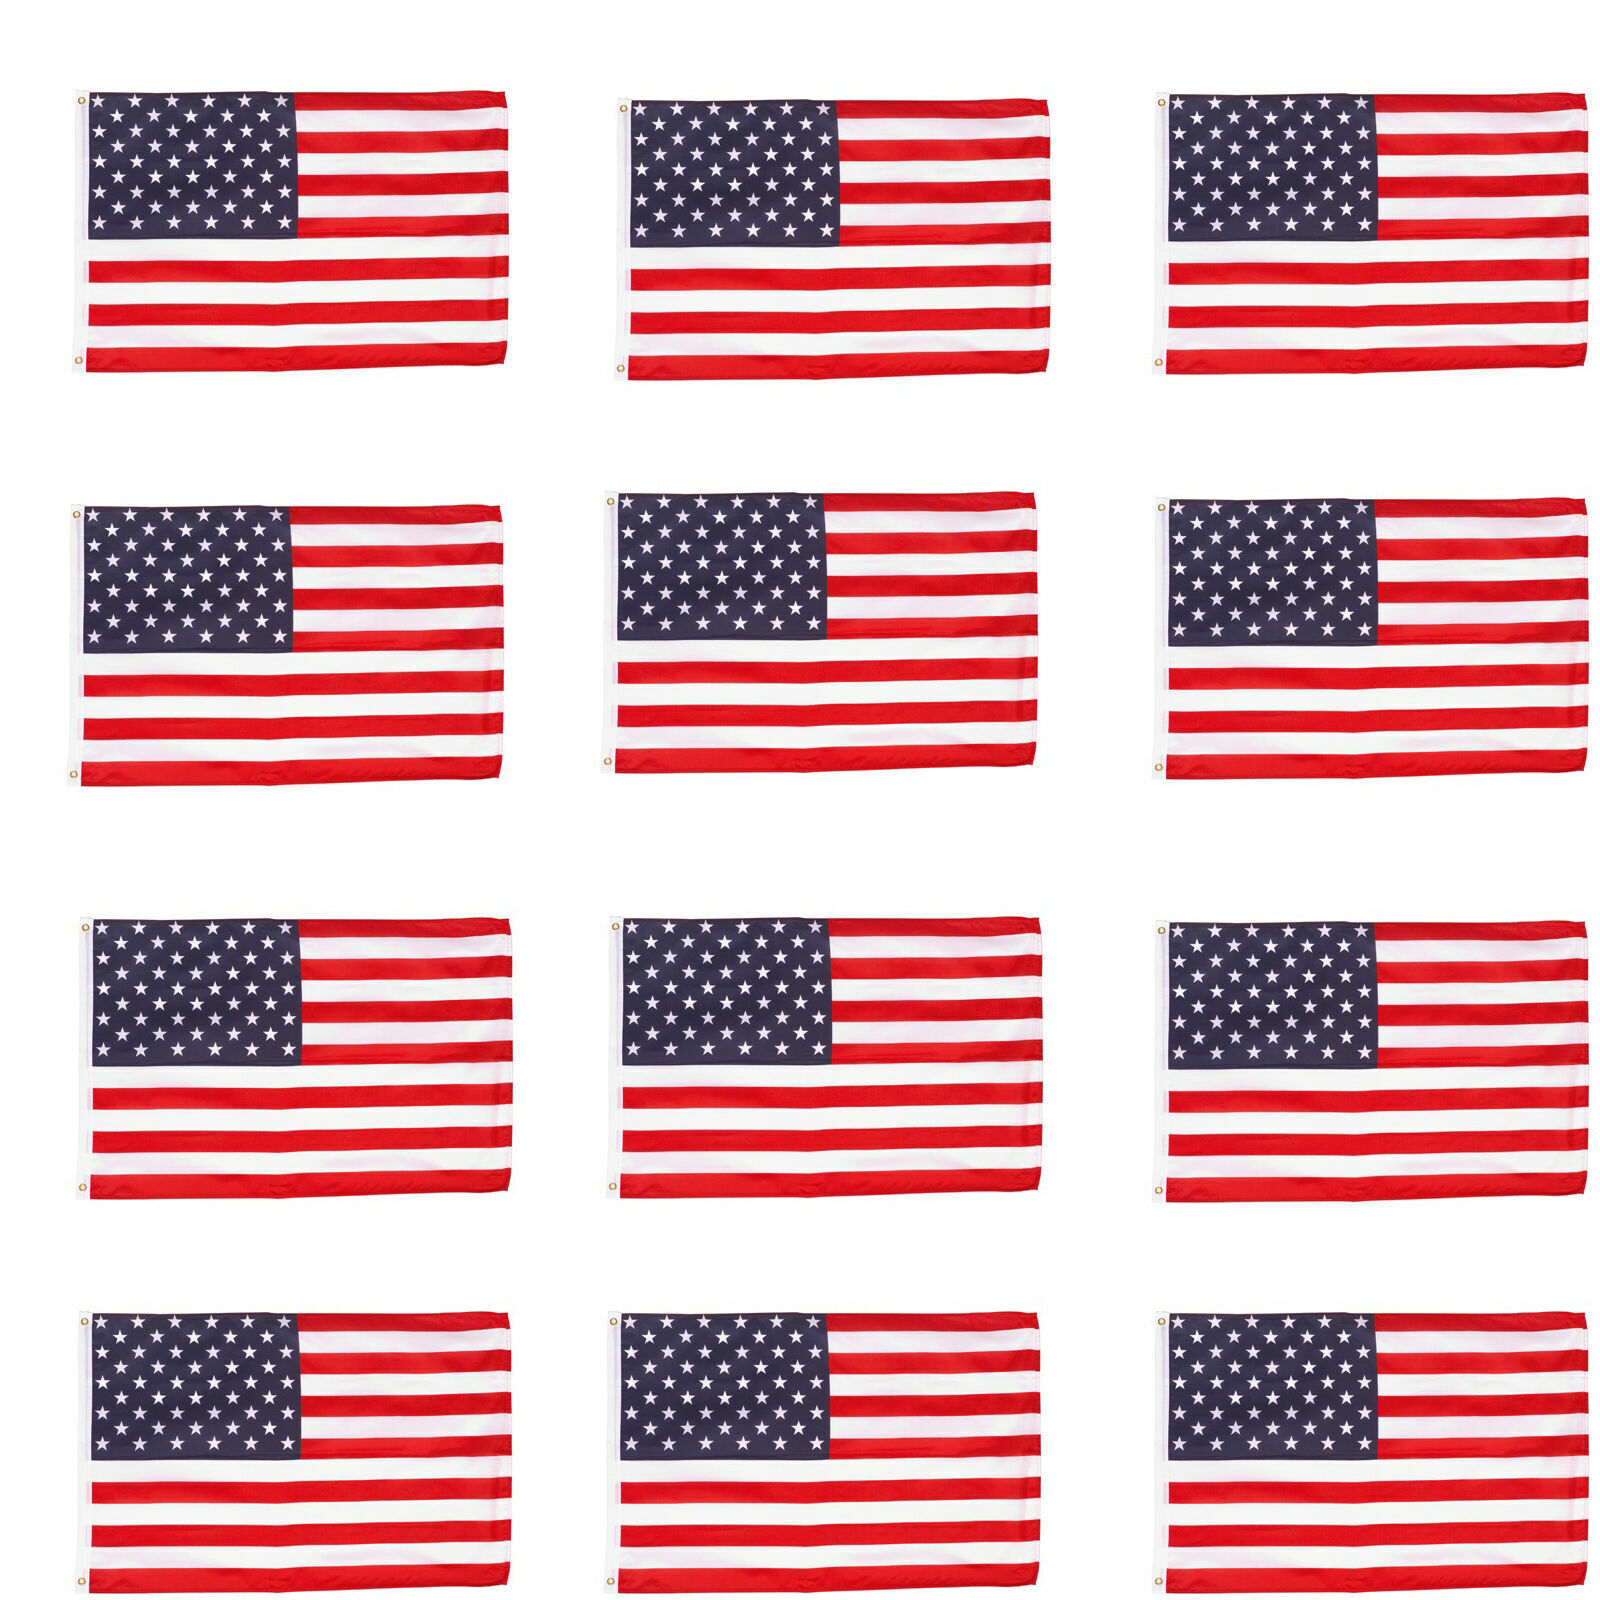 Wholesale lot 12 3' x 5' ft. USA US American Flag Stars Grommets United States